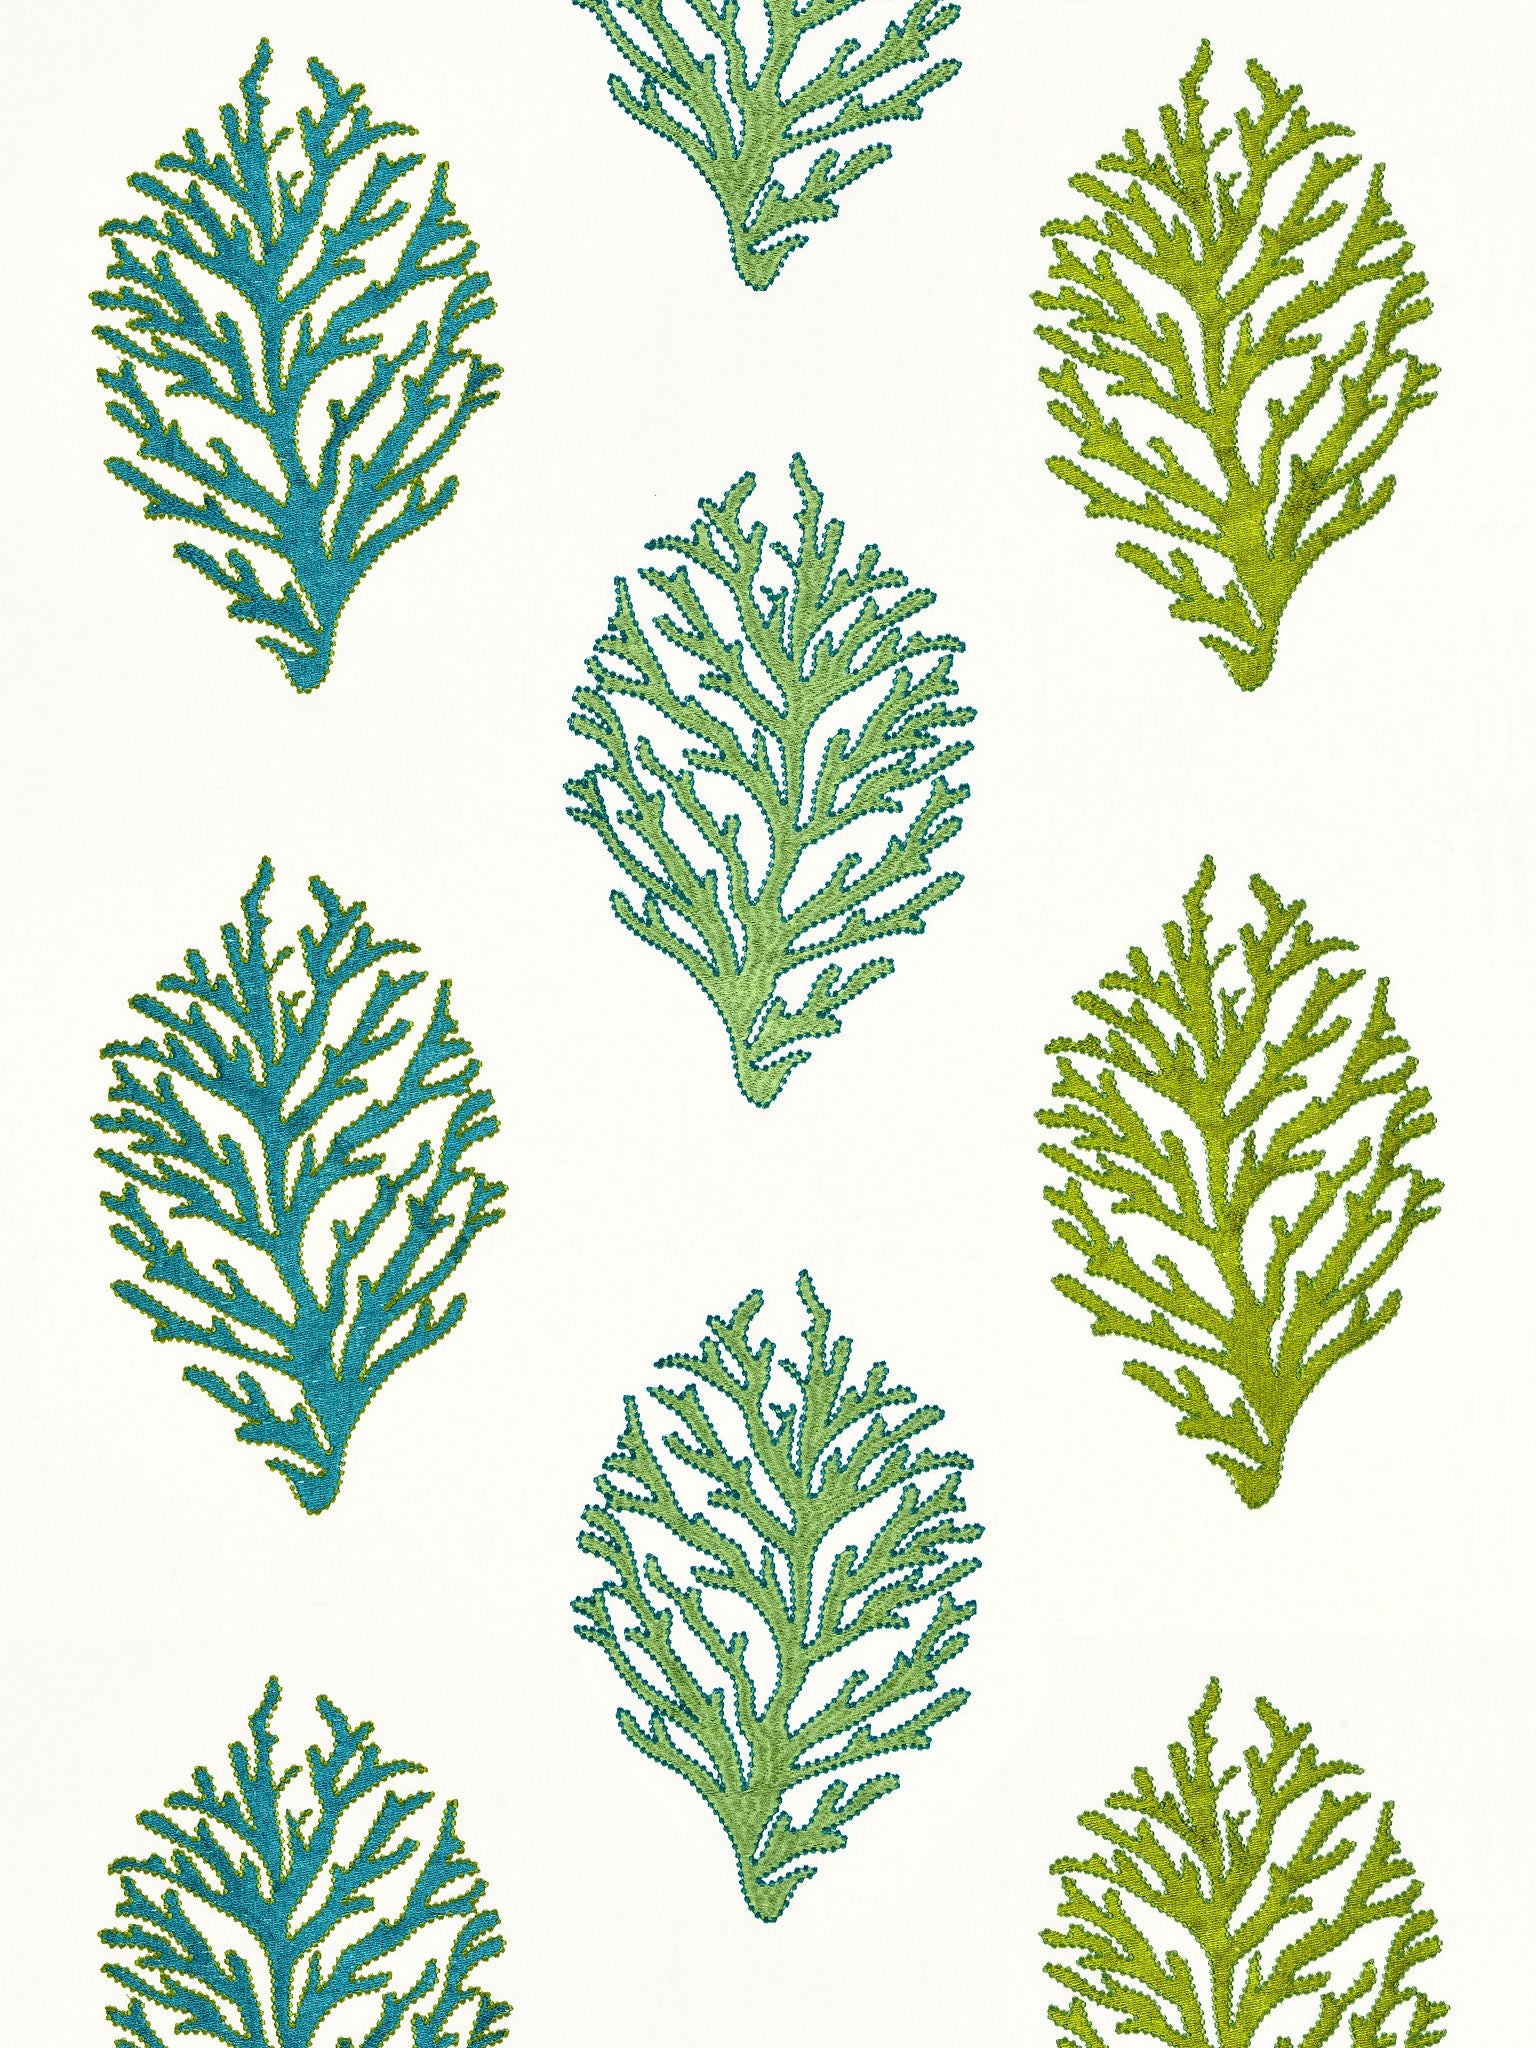 Coral Reef Embroidery fabric in seagrass color - pattern number GW 000227204 - by Scalamandre in the Grey Watkins collection